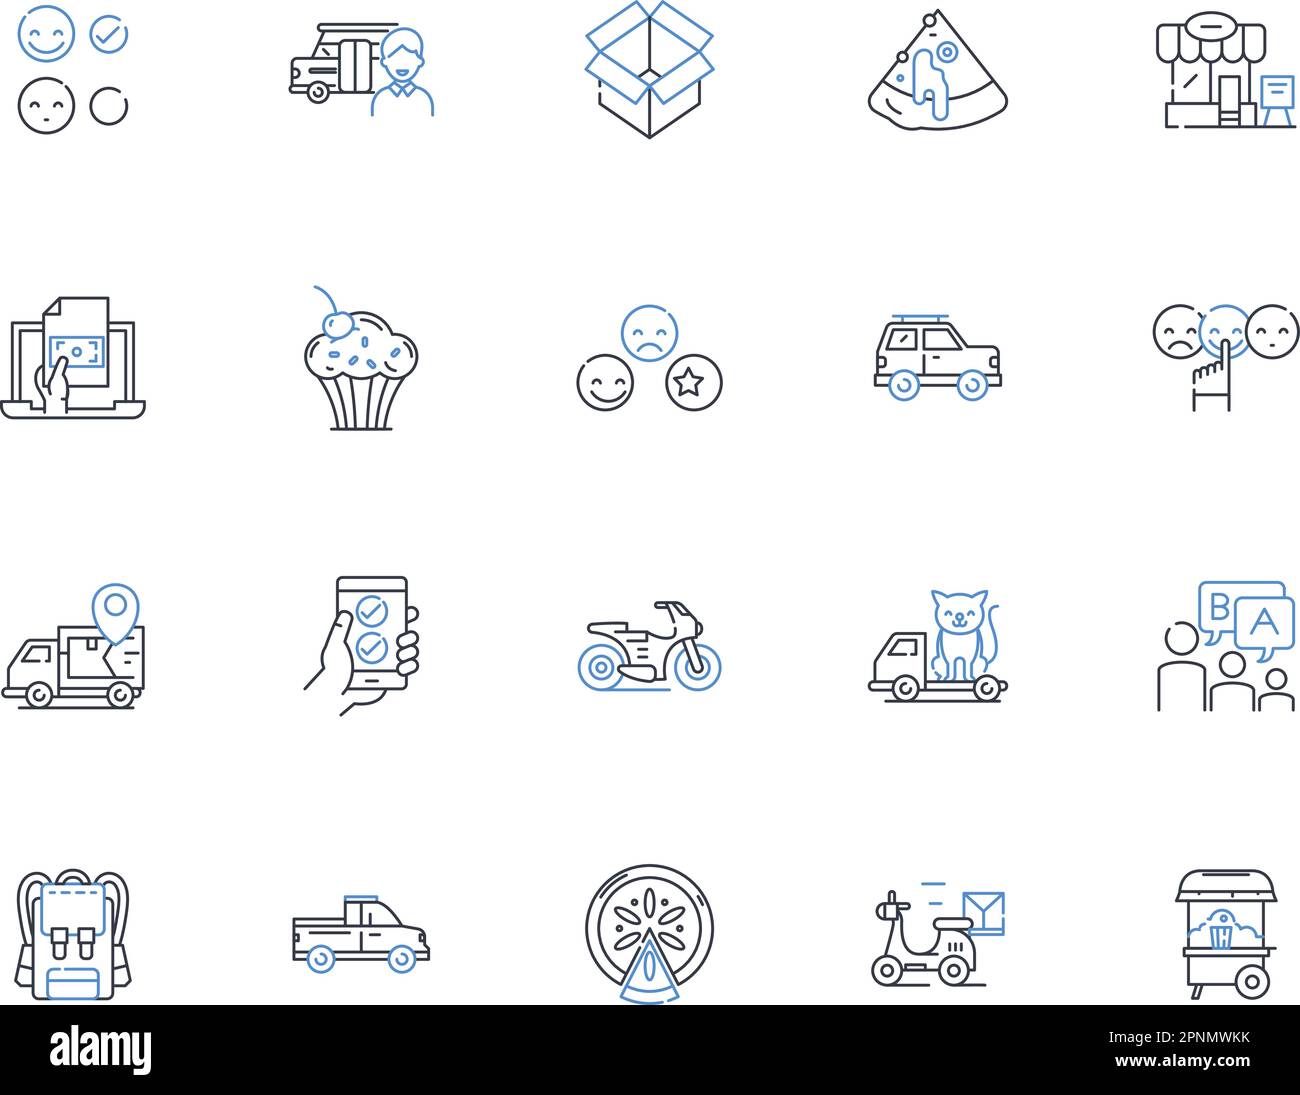 Supply management line icons collection. Procurement, Logistics, Inventory, Sourcing, Supplier, Materials, Purchasing vector and linear illustration Stock Vector